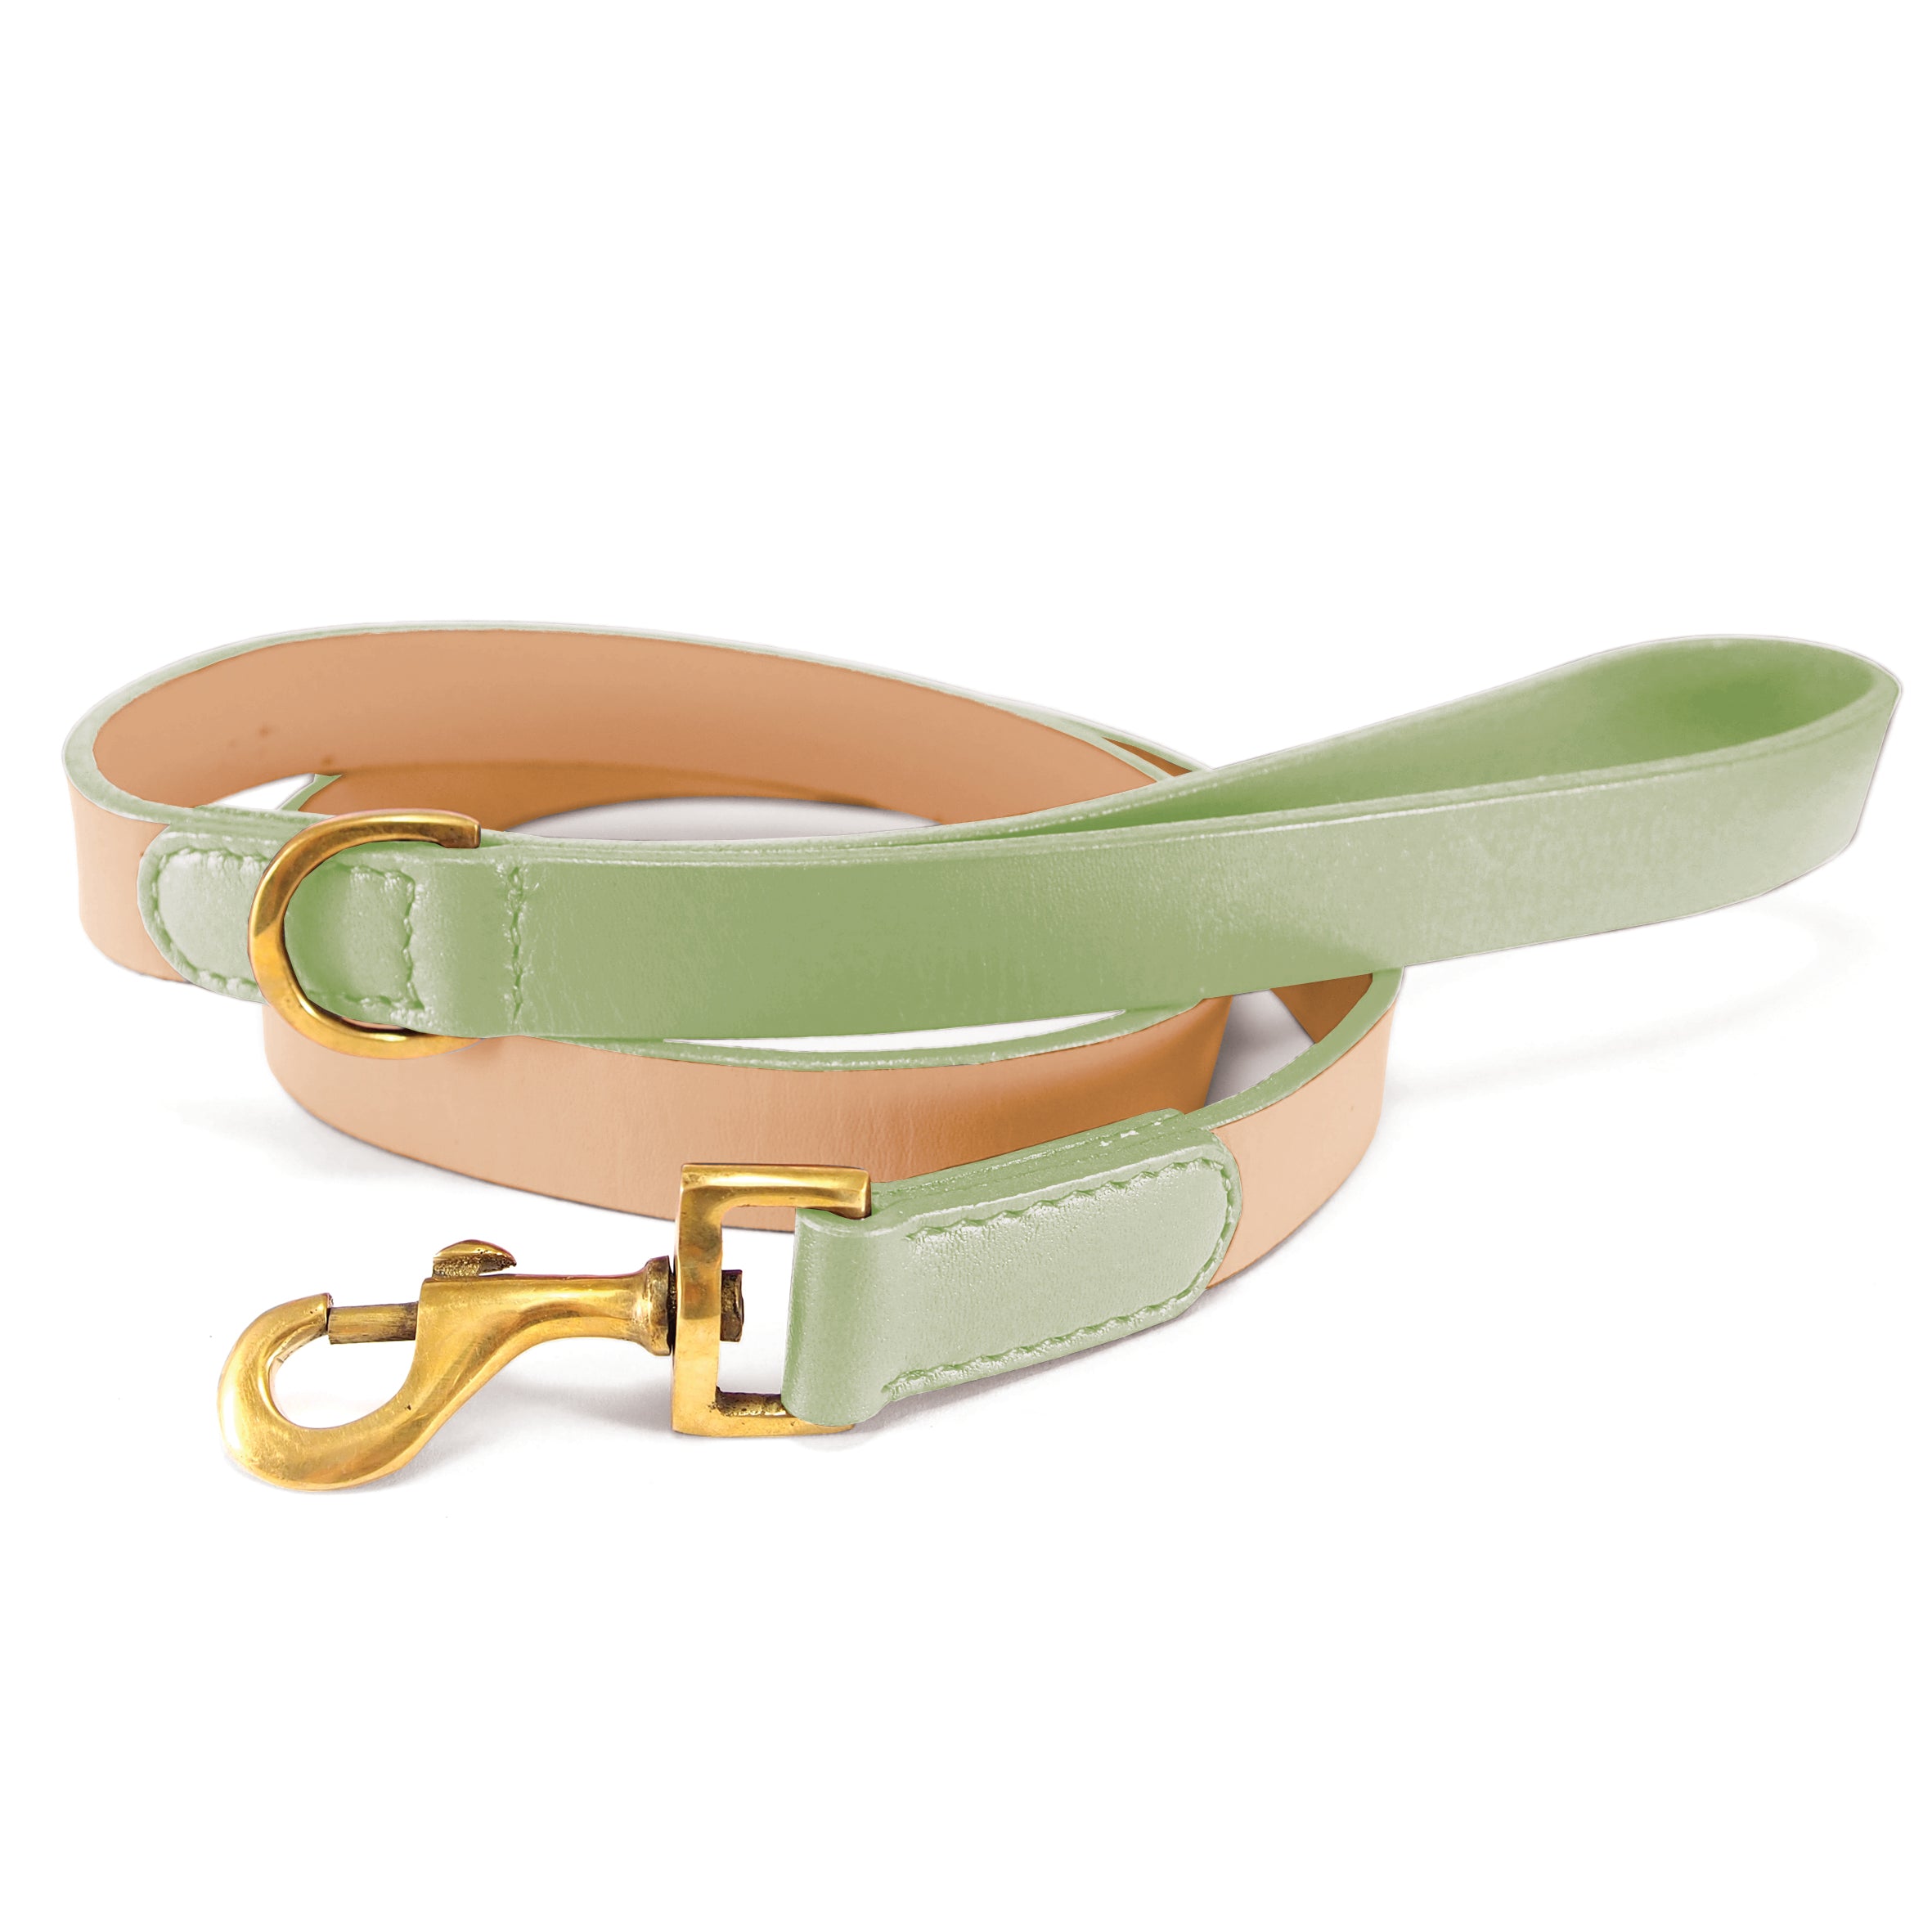 A Jersey Lead - Natural+Pear by Georgie Paws, featuring a peach-colored strap and a green handle, against a white background.